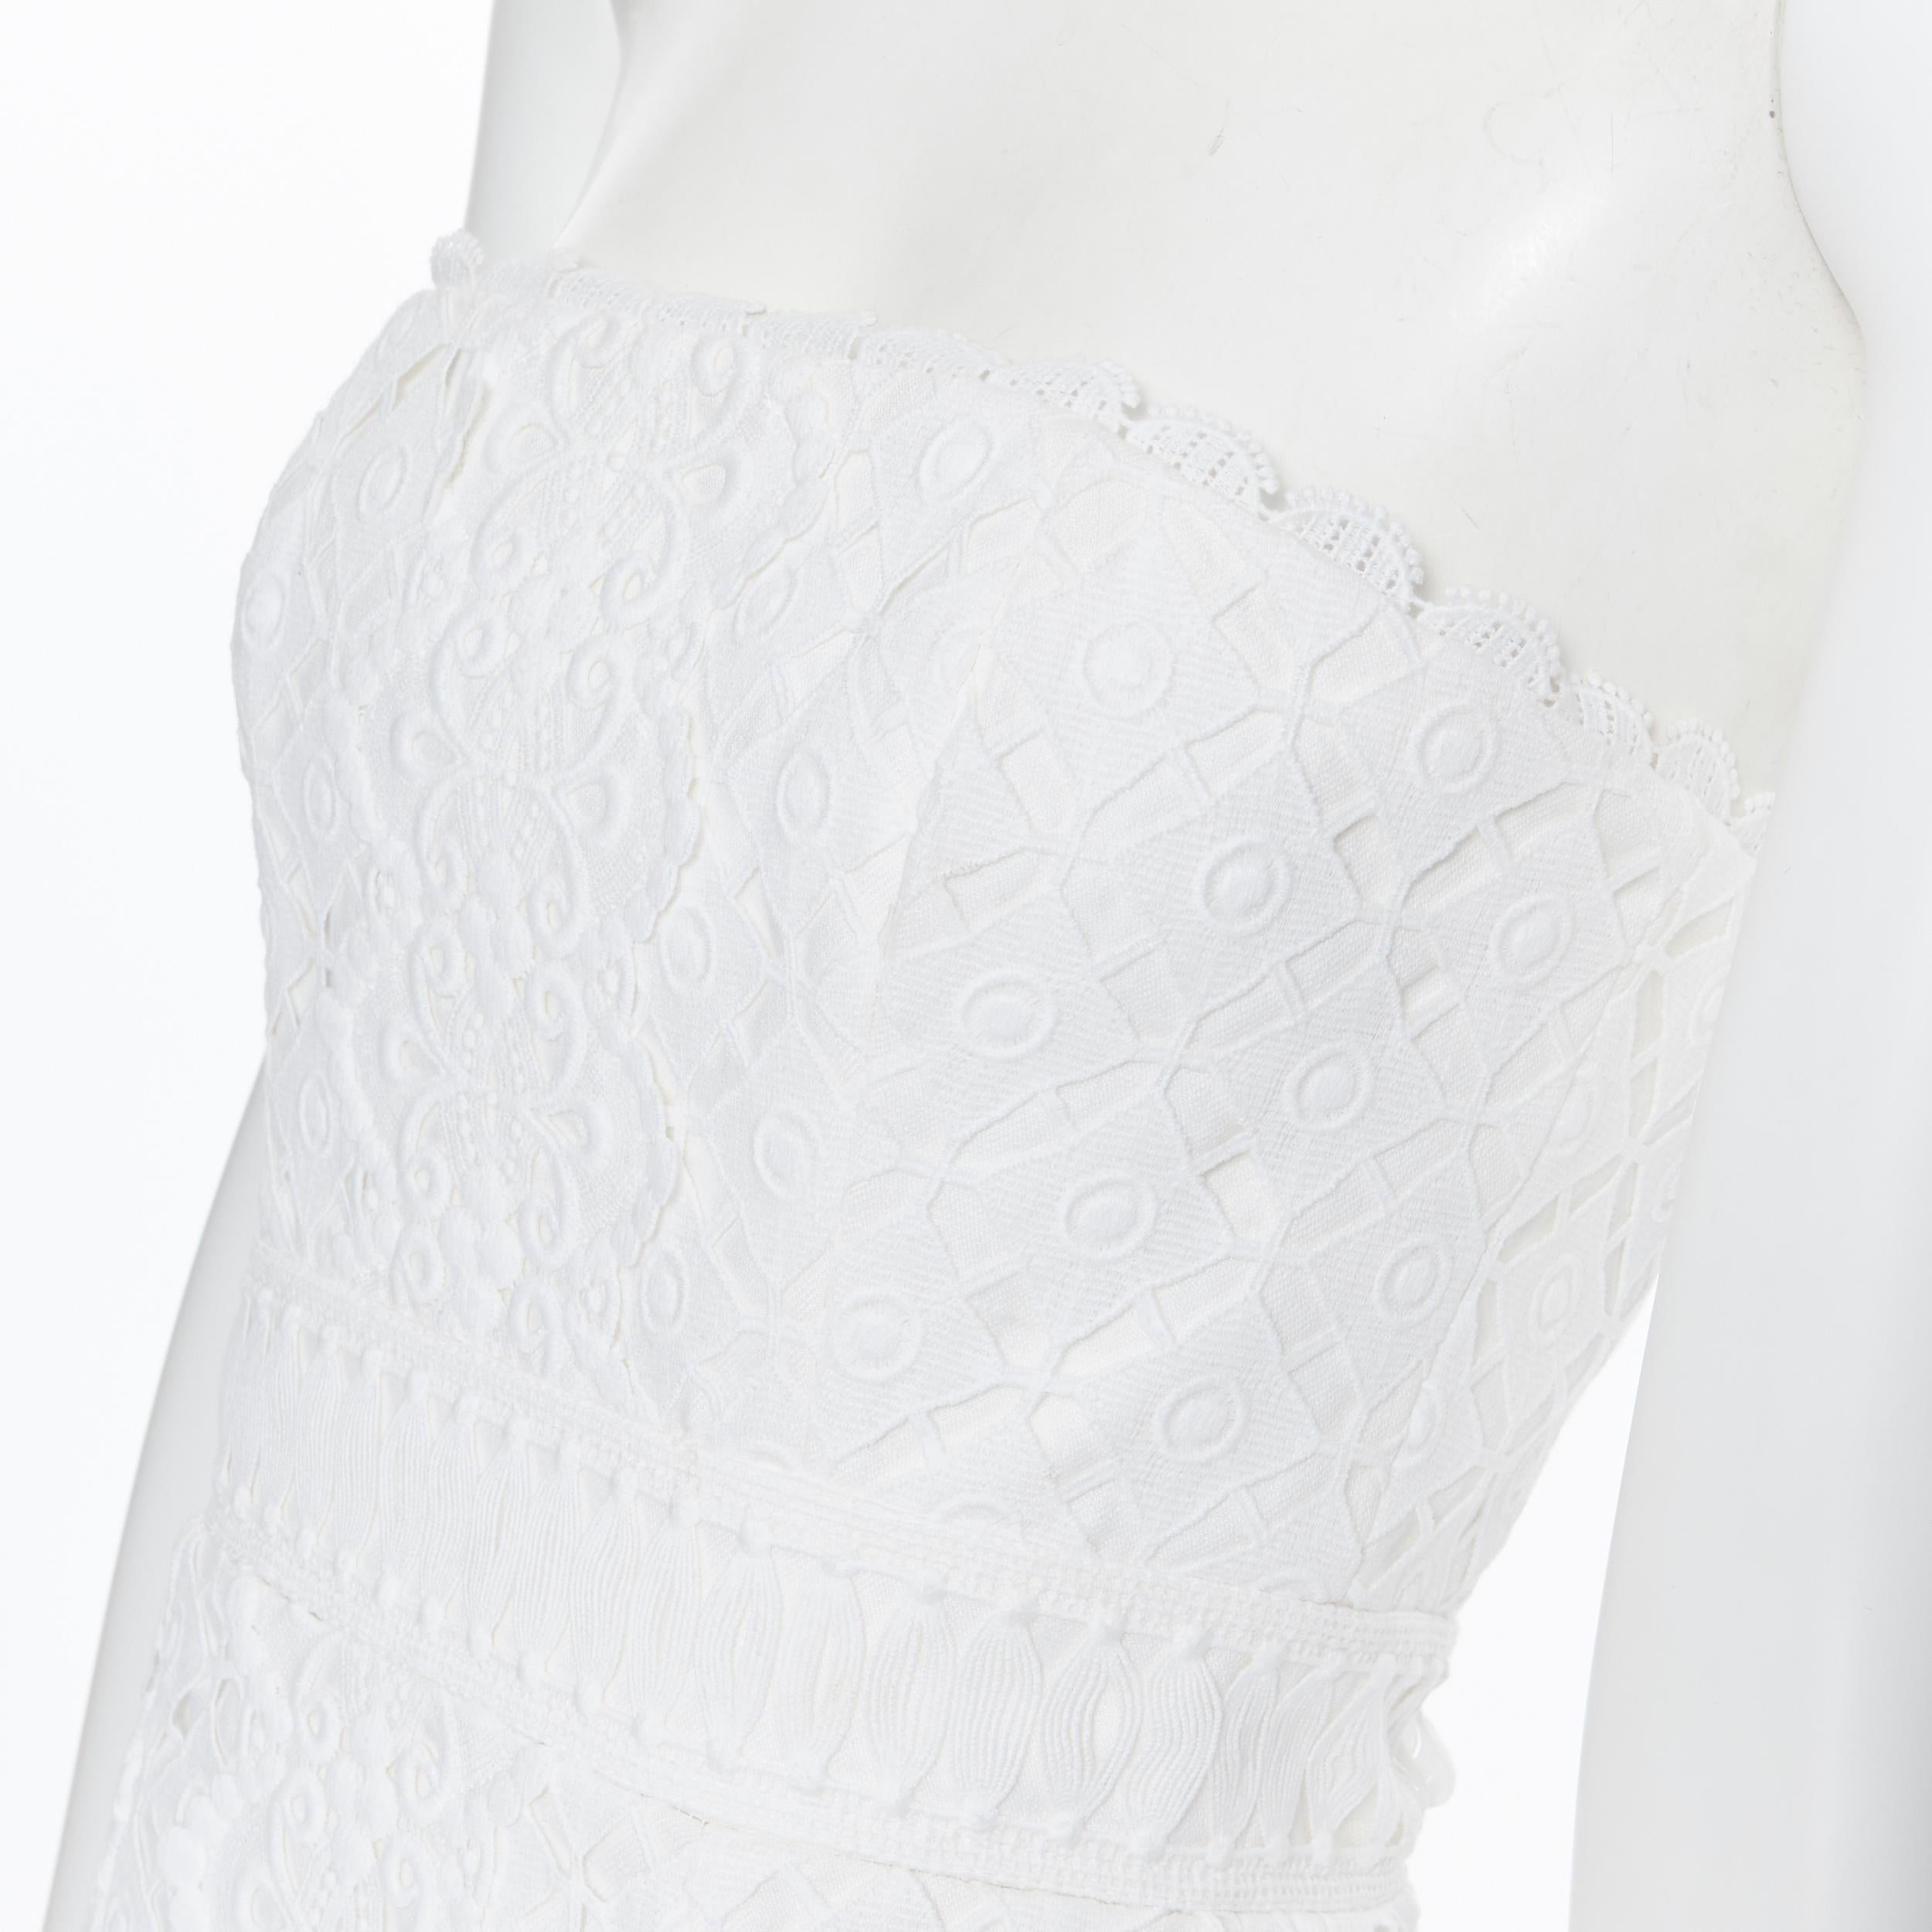 ANDREW GN 2009 white floral lace lattice strapless cocktail dress IT36 XS
Brand: Andrew Gn
Designer: Andrew Gn
Model Name / Style: Lace dress
Material: Cotton
Color: White
Pattern: Solid
Closure: Zip
Extra Detail: Strapless. Fitted waist. Concealed